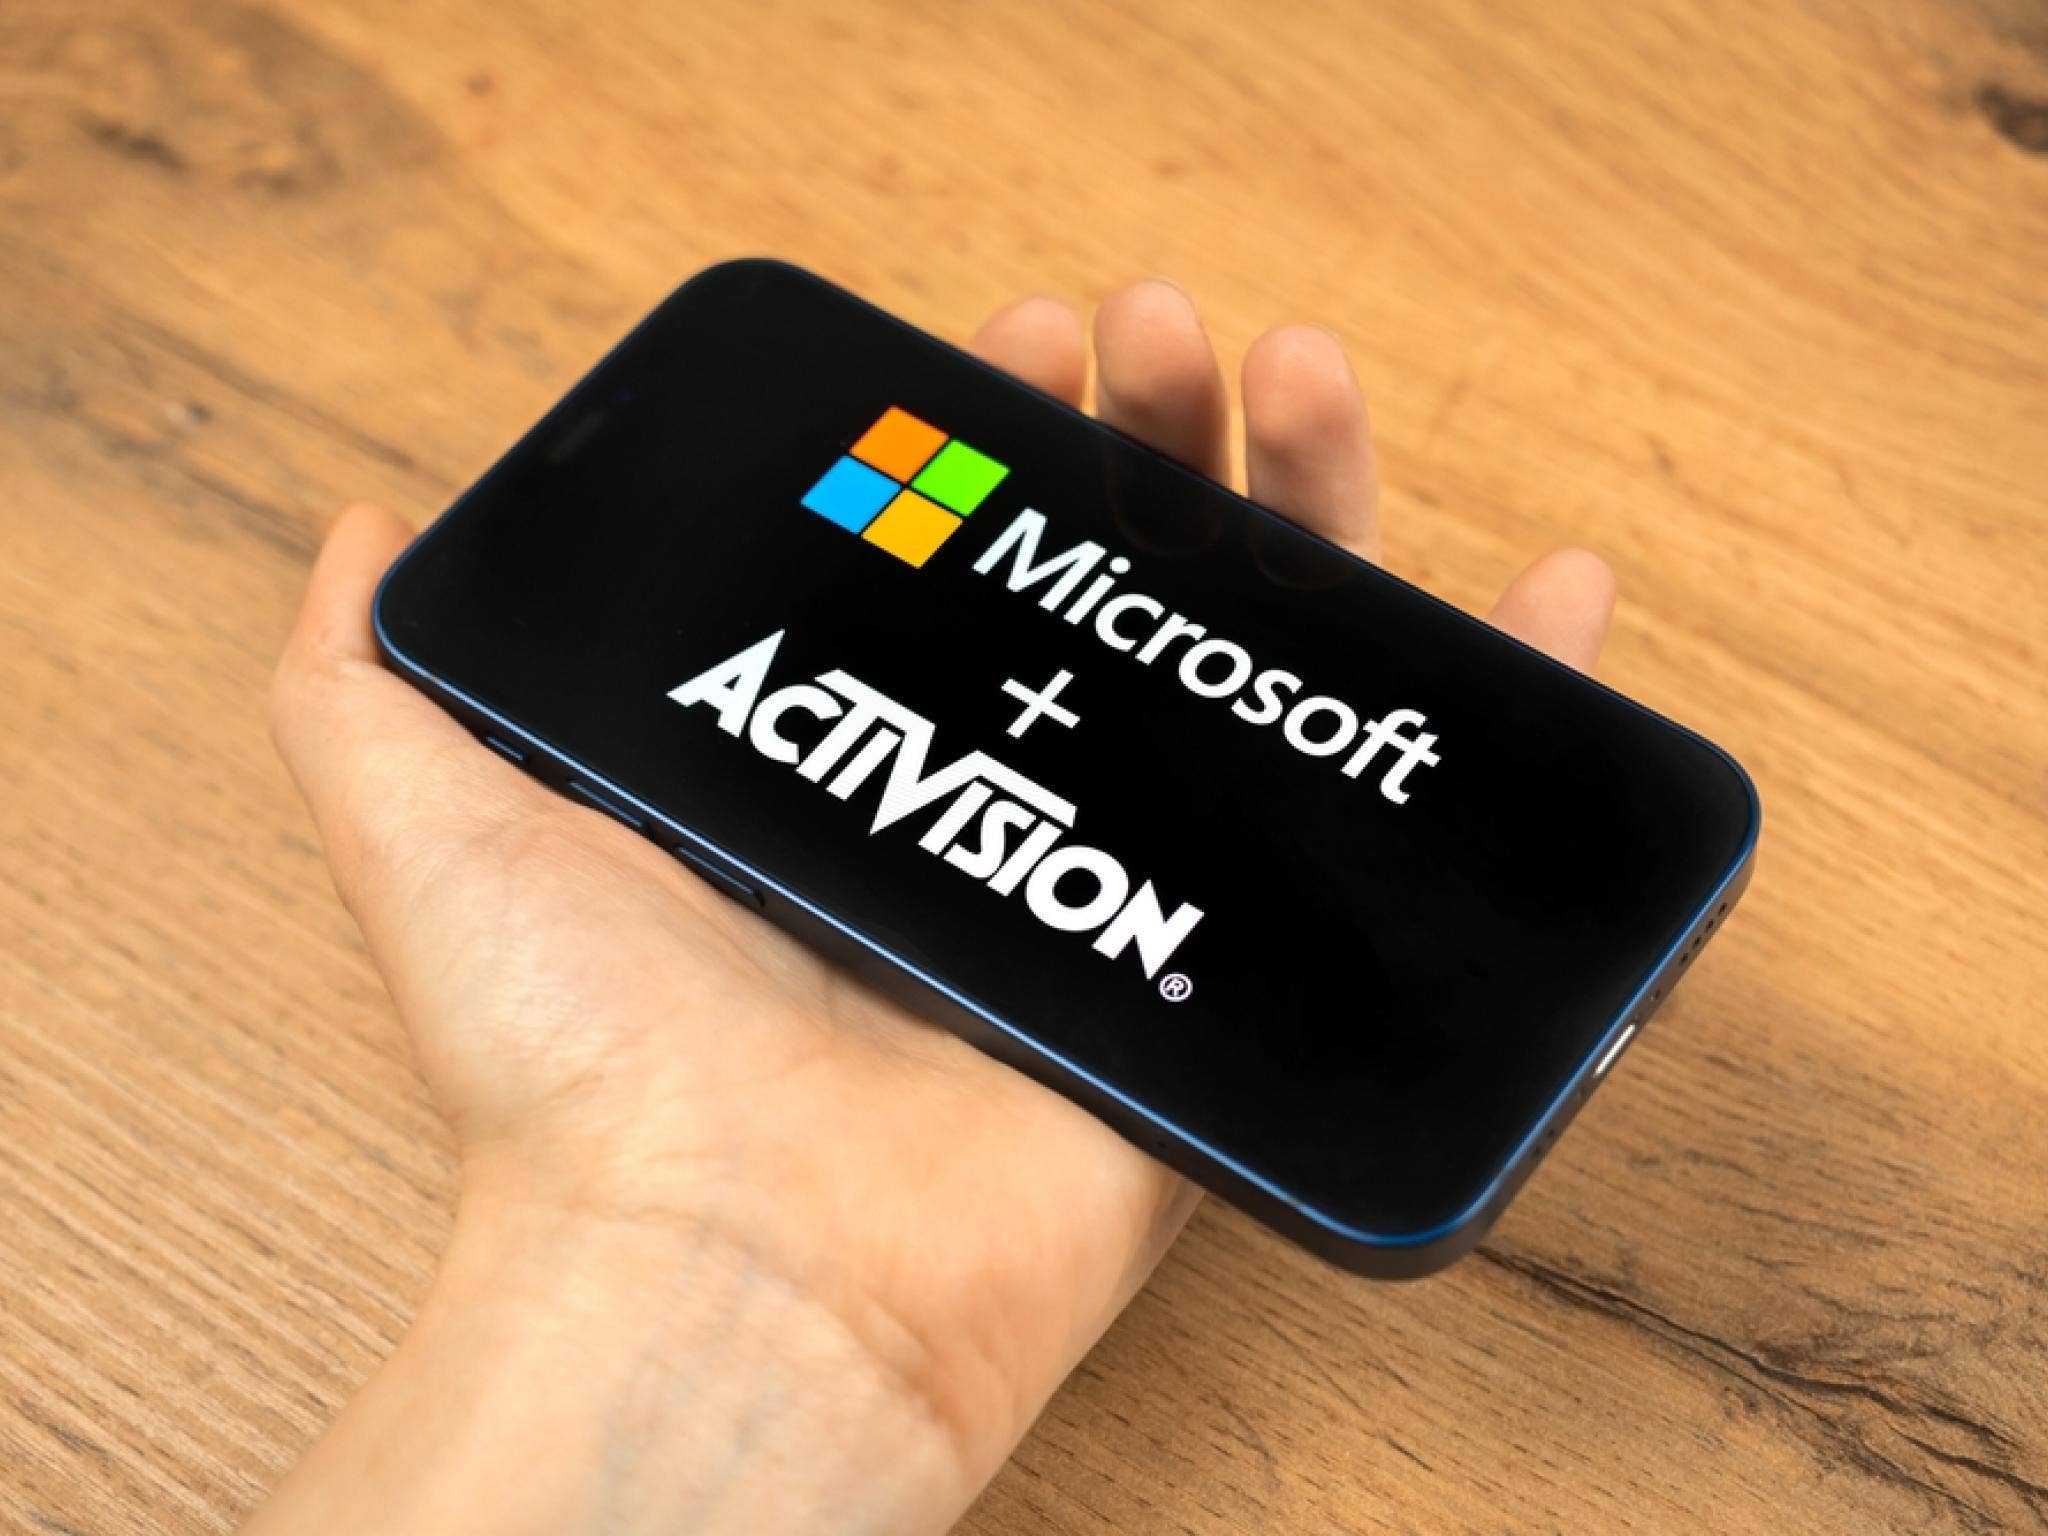 Wells Fargo, Morgan Stanley Upgrade Activision: What You Need To Know About The Microsoft Deal